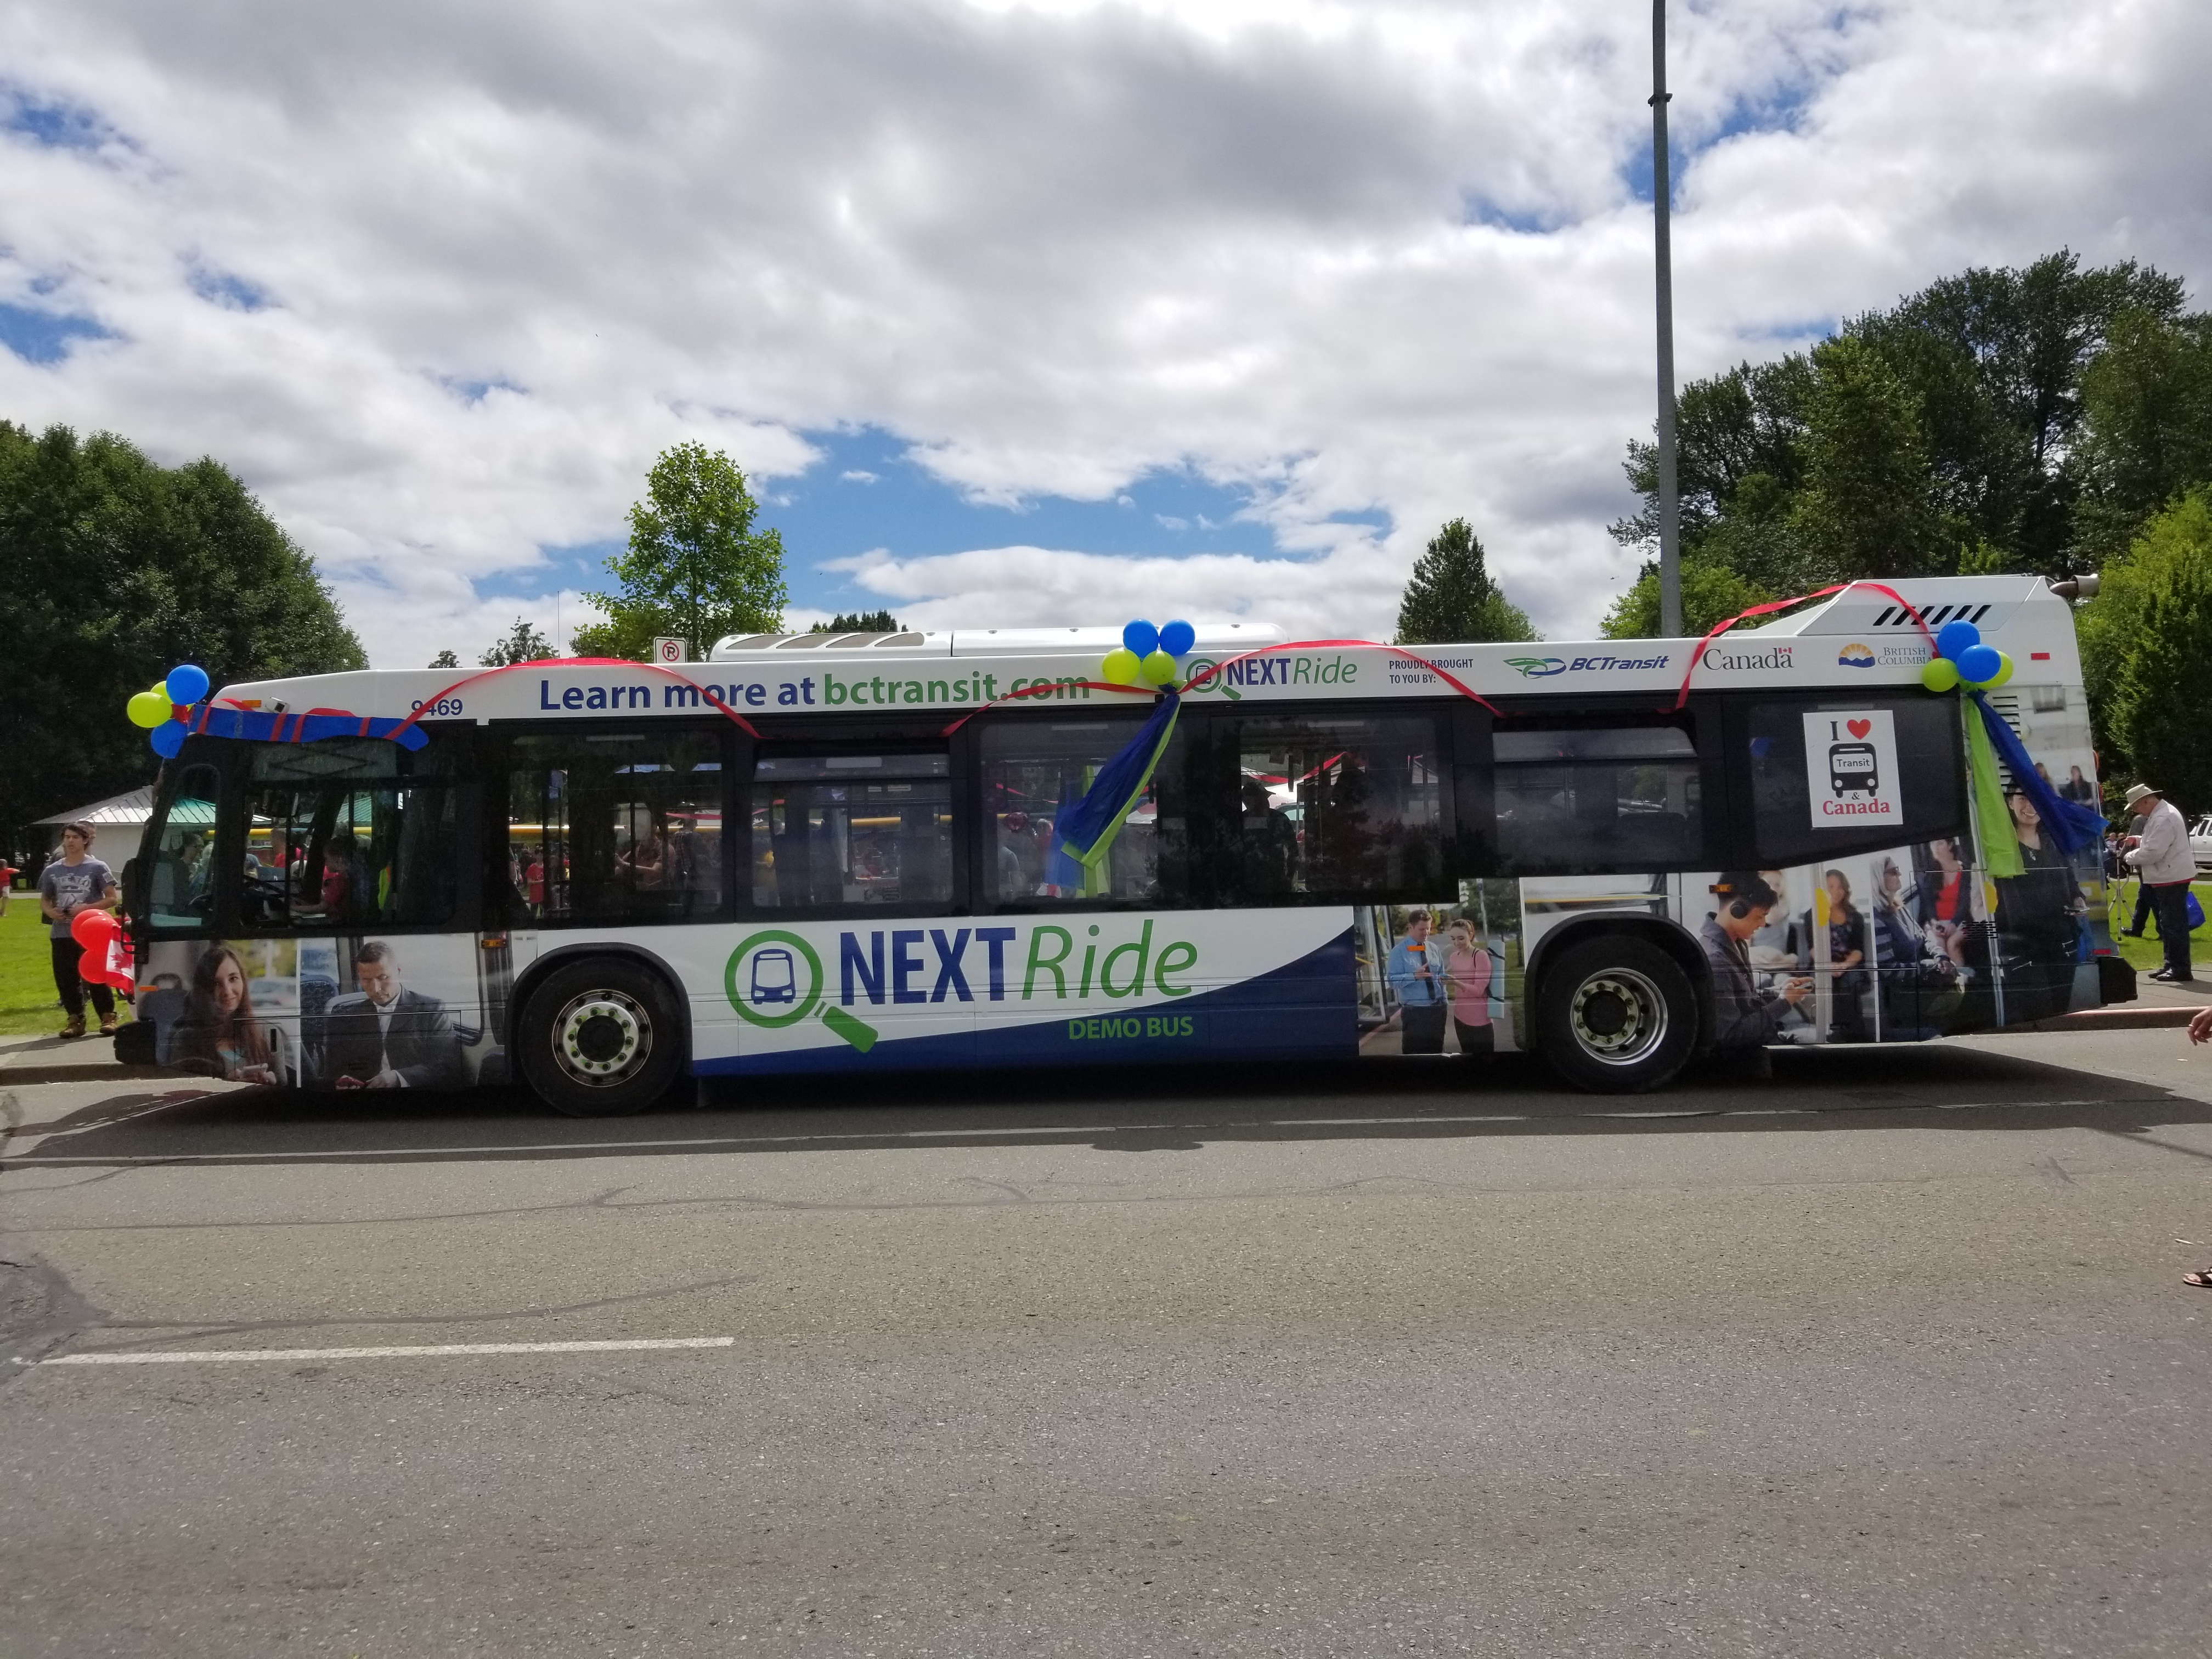 free transit service available during b.c. day weekend - my comox